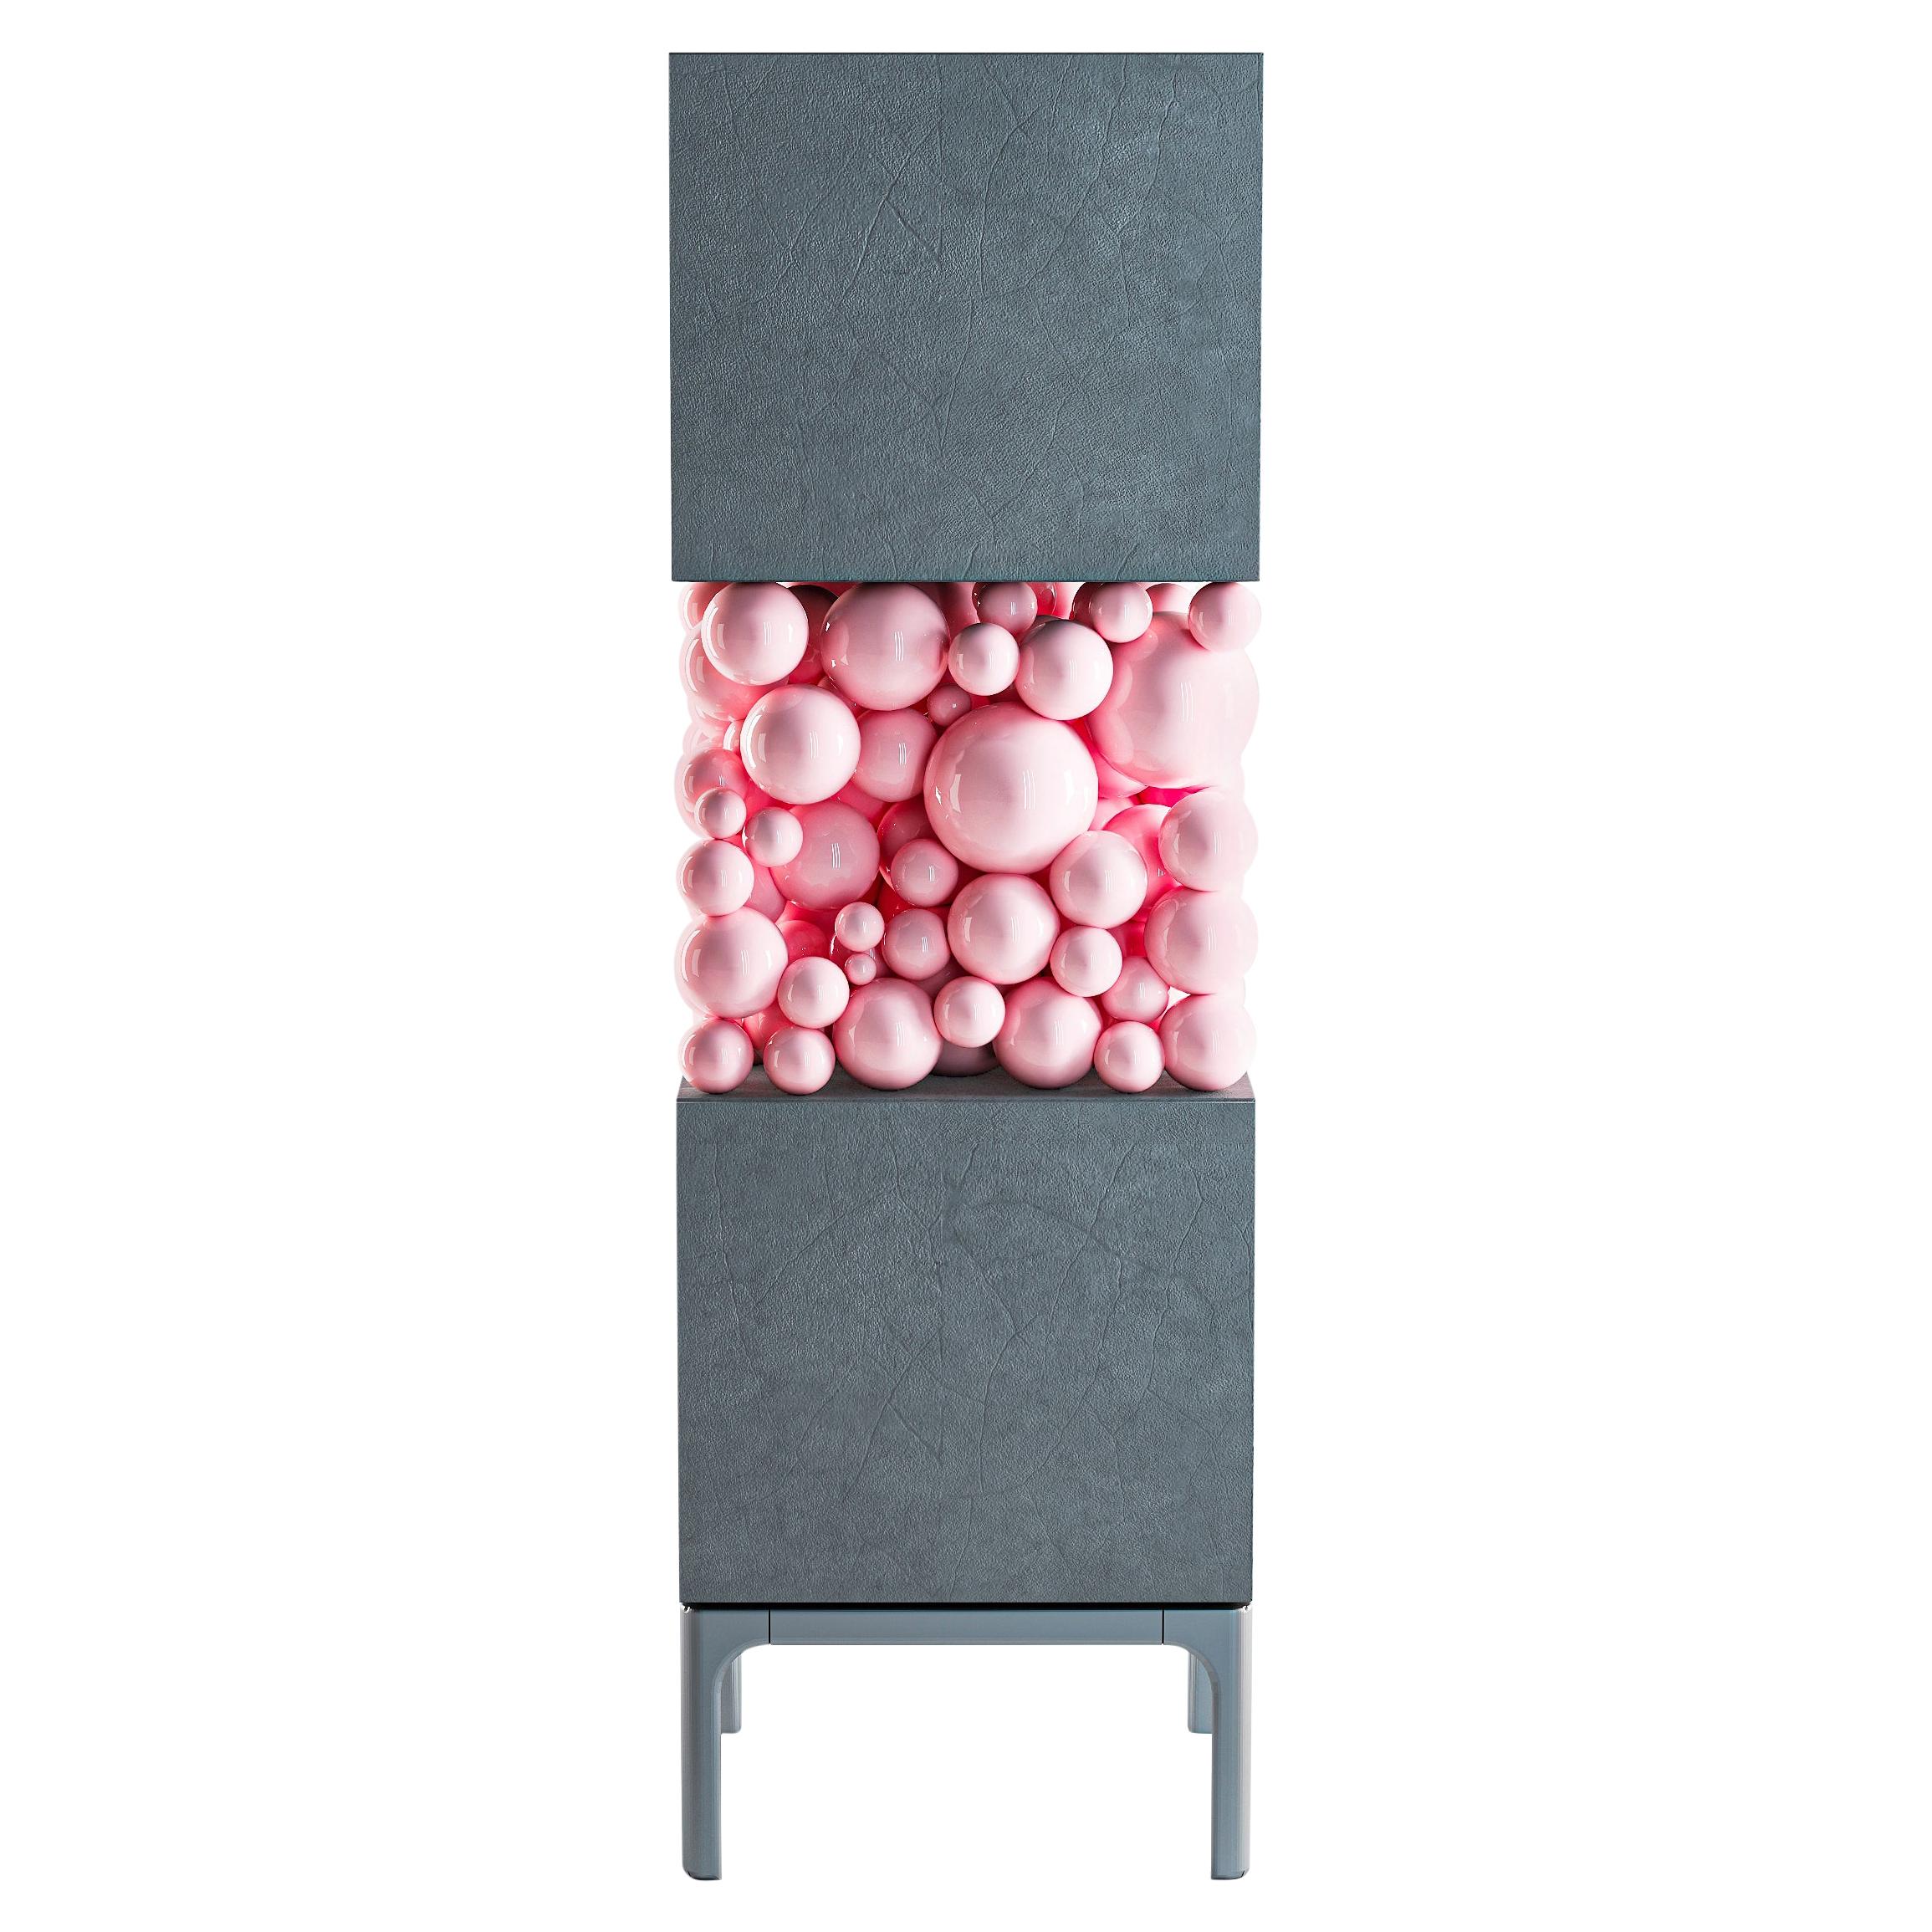 Wooden Gray Cabinet, Bubbles Collection, Amazing Emotional Design